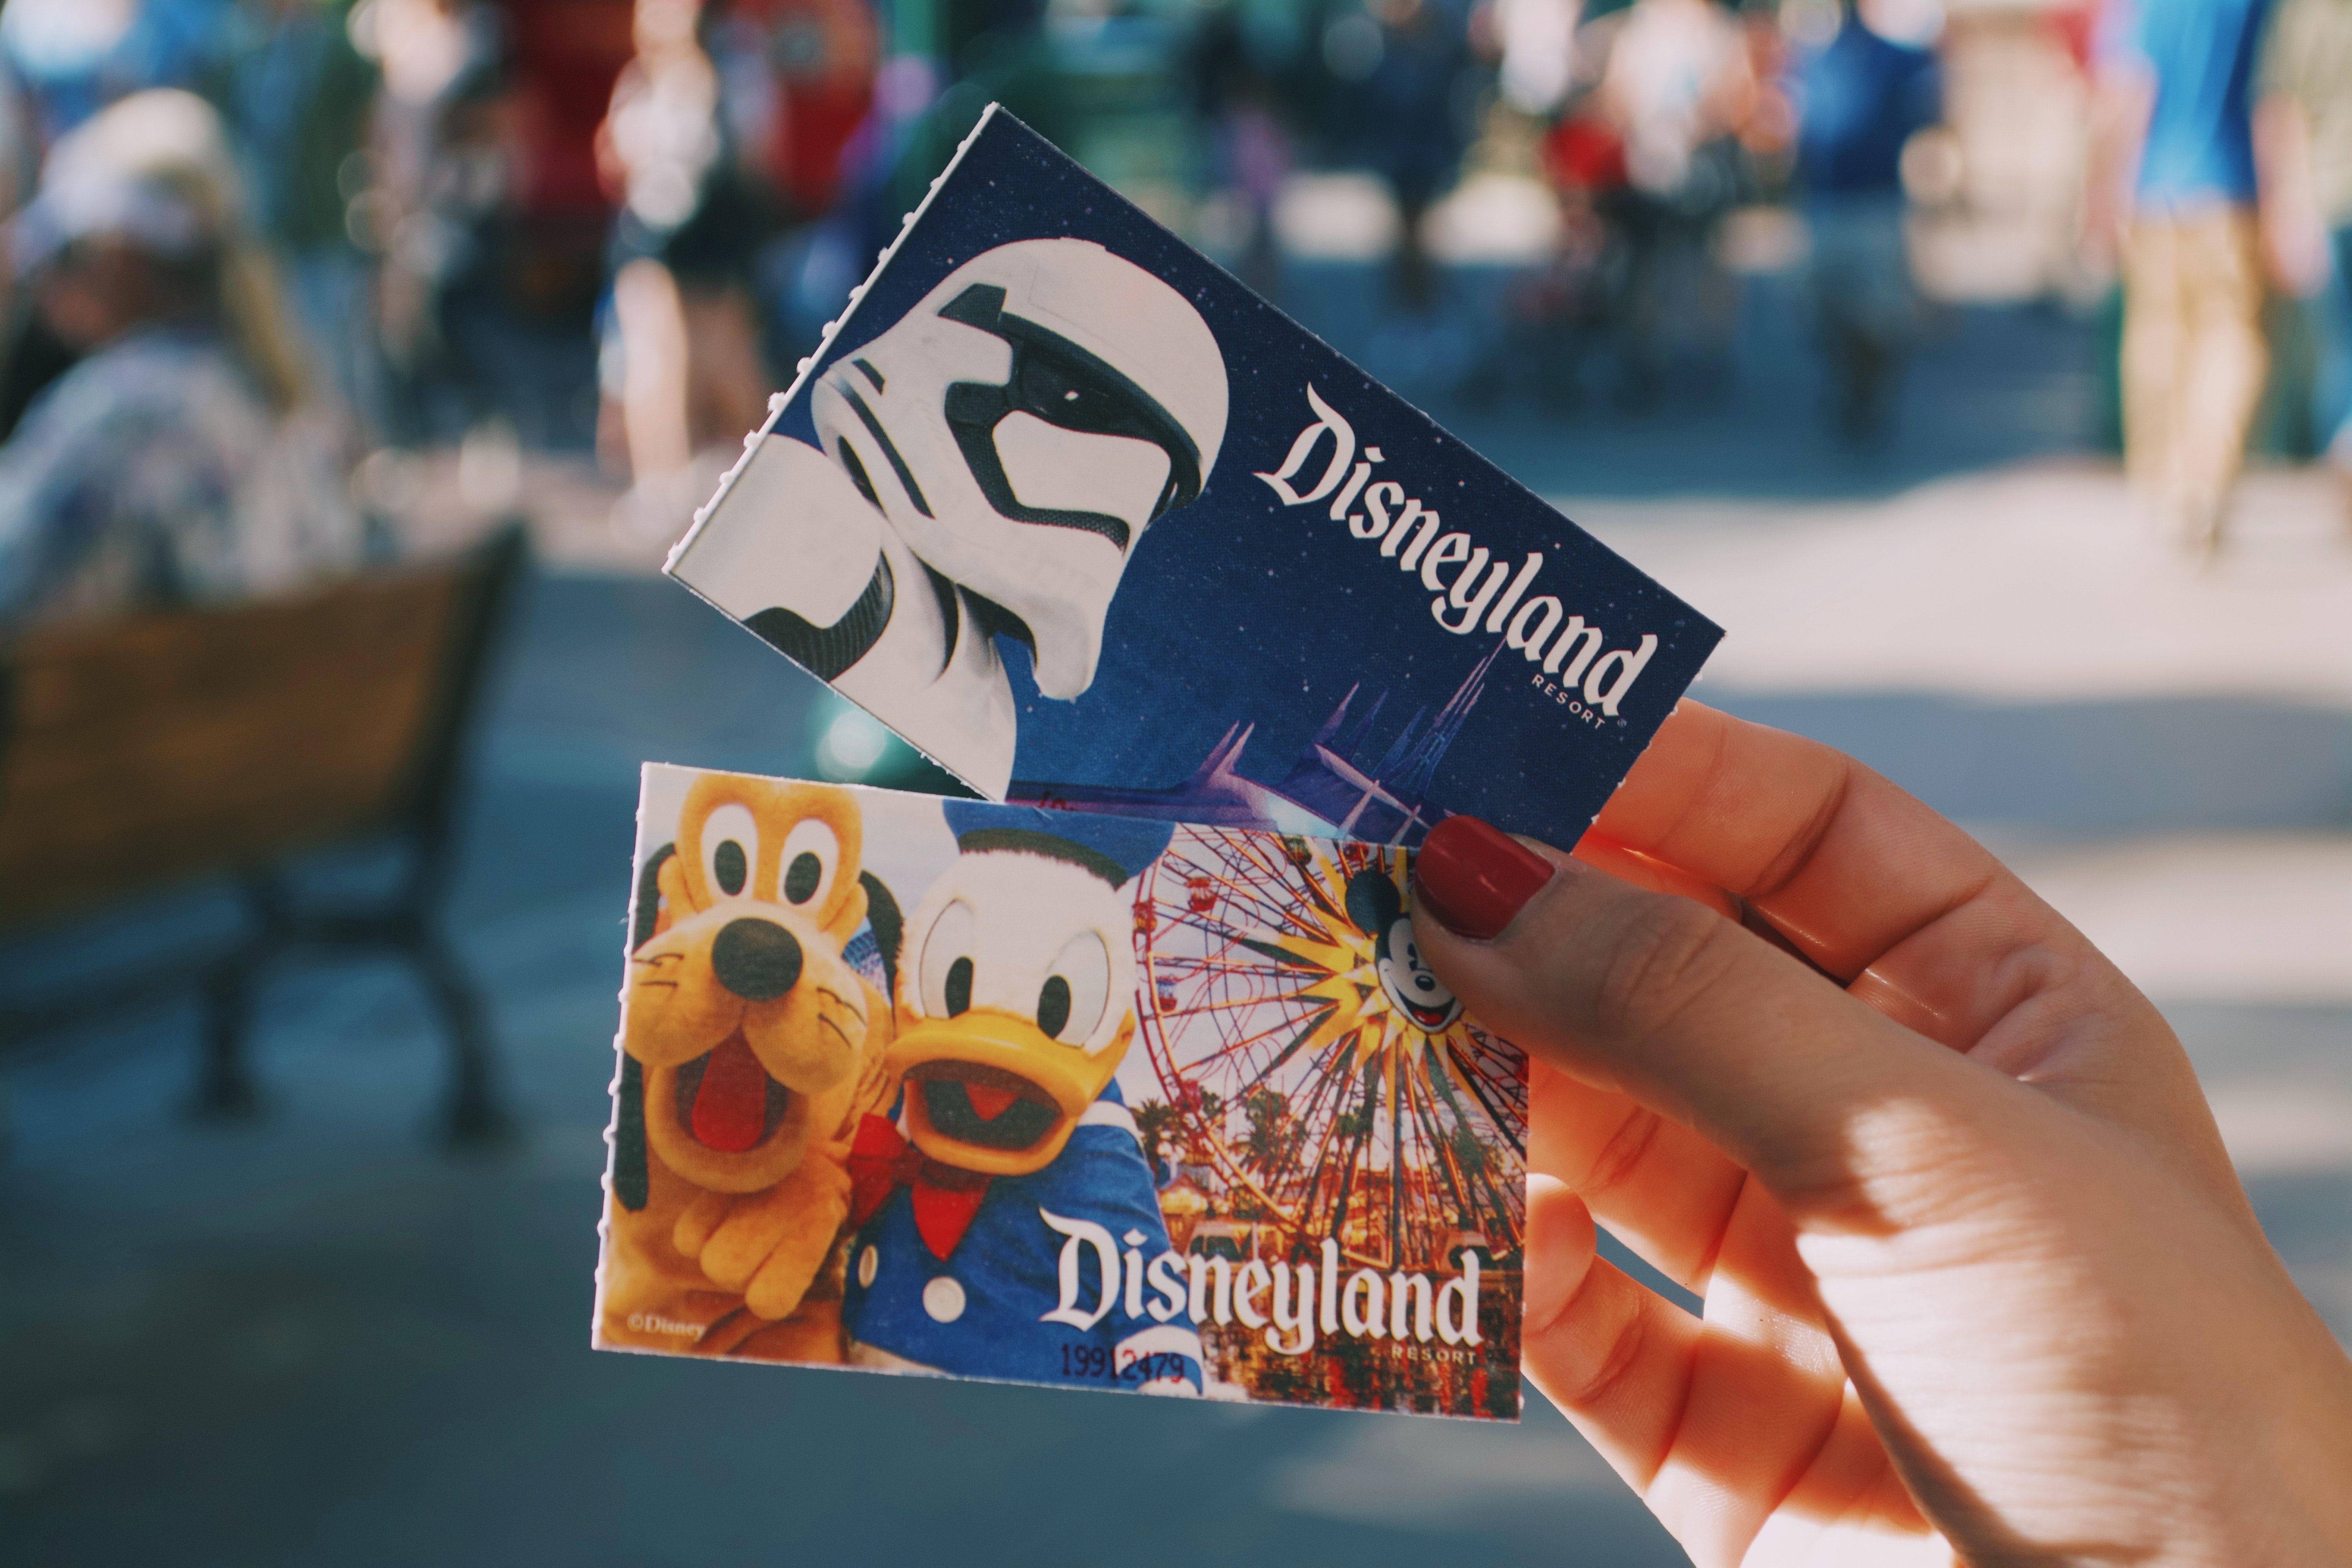 Megan's family had promised to take her to Disneyland on her birthday. | Source: Unsplash